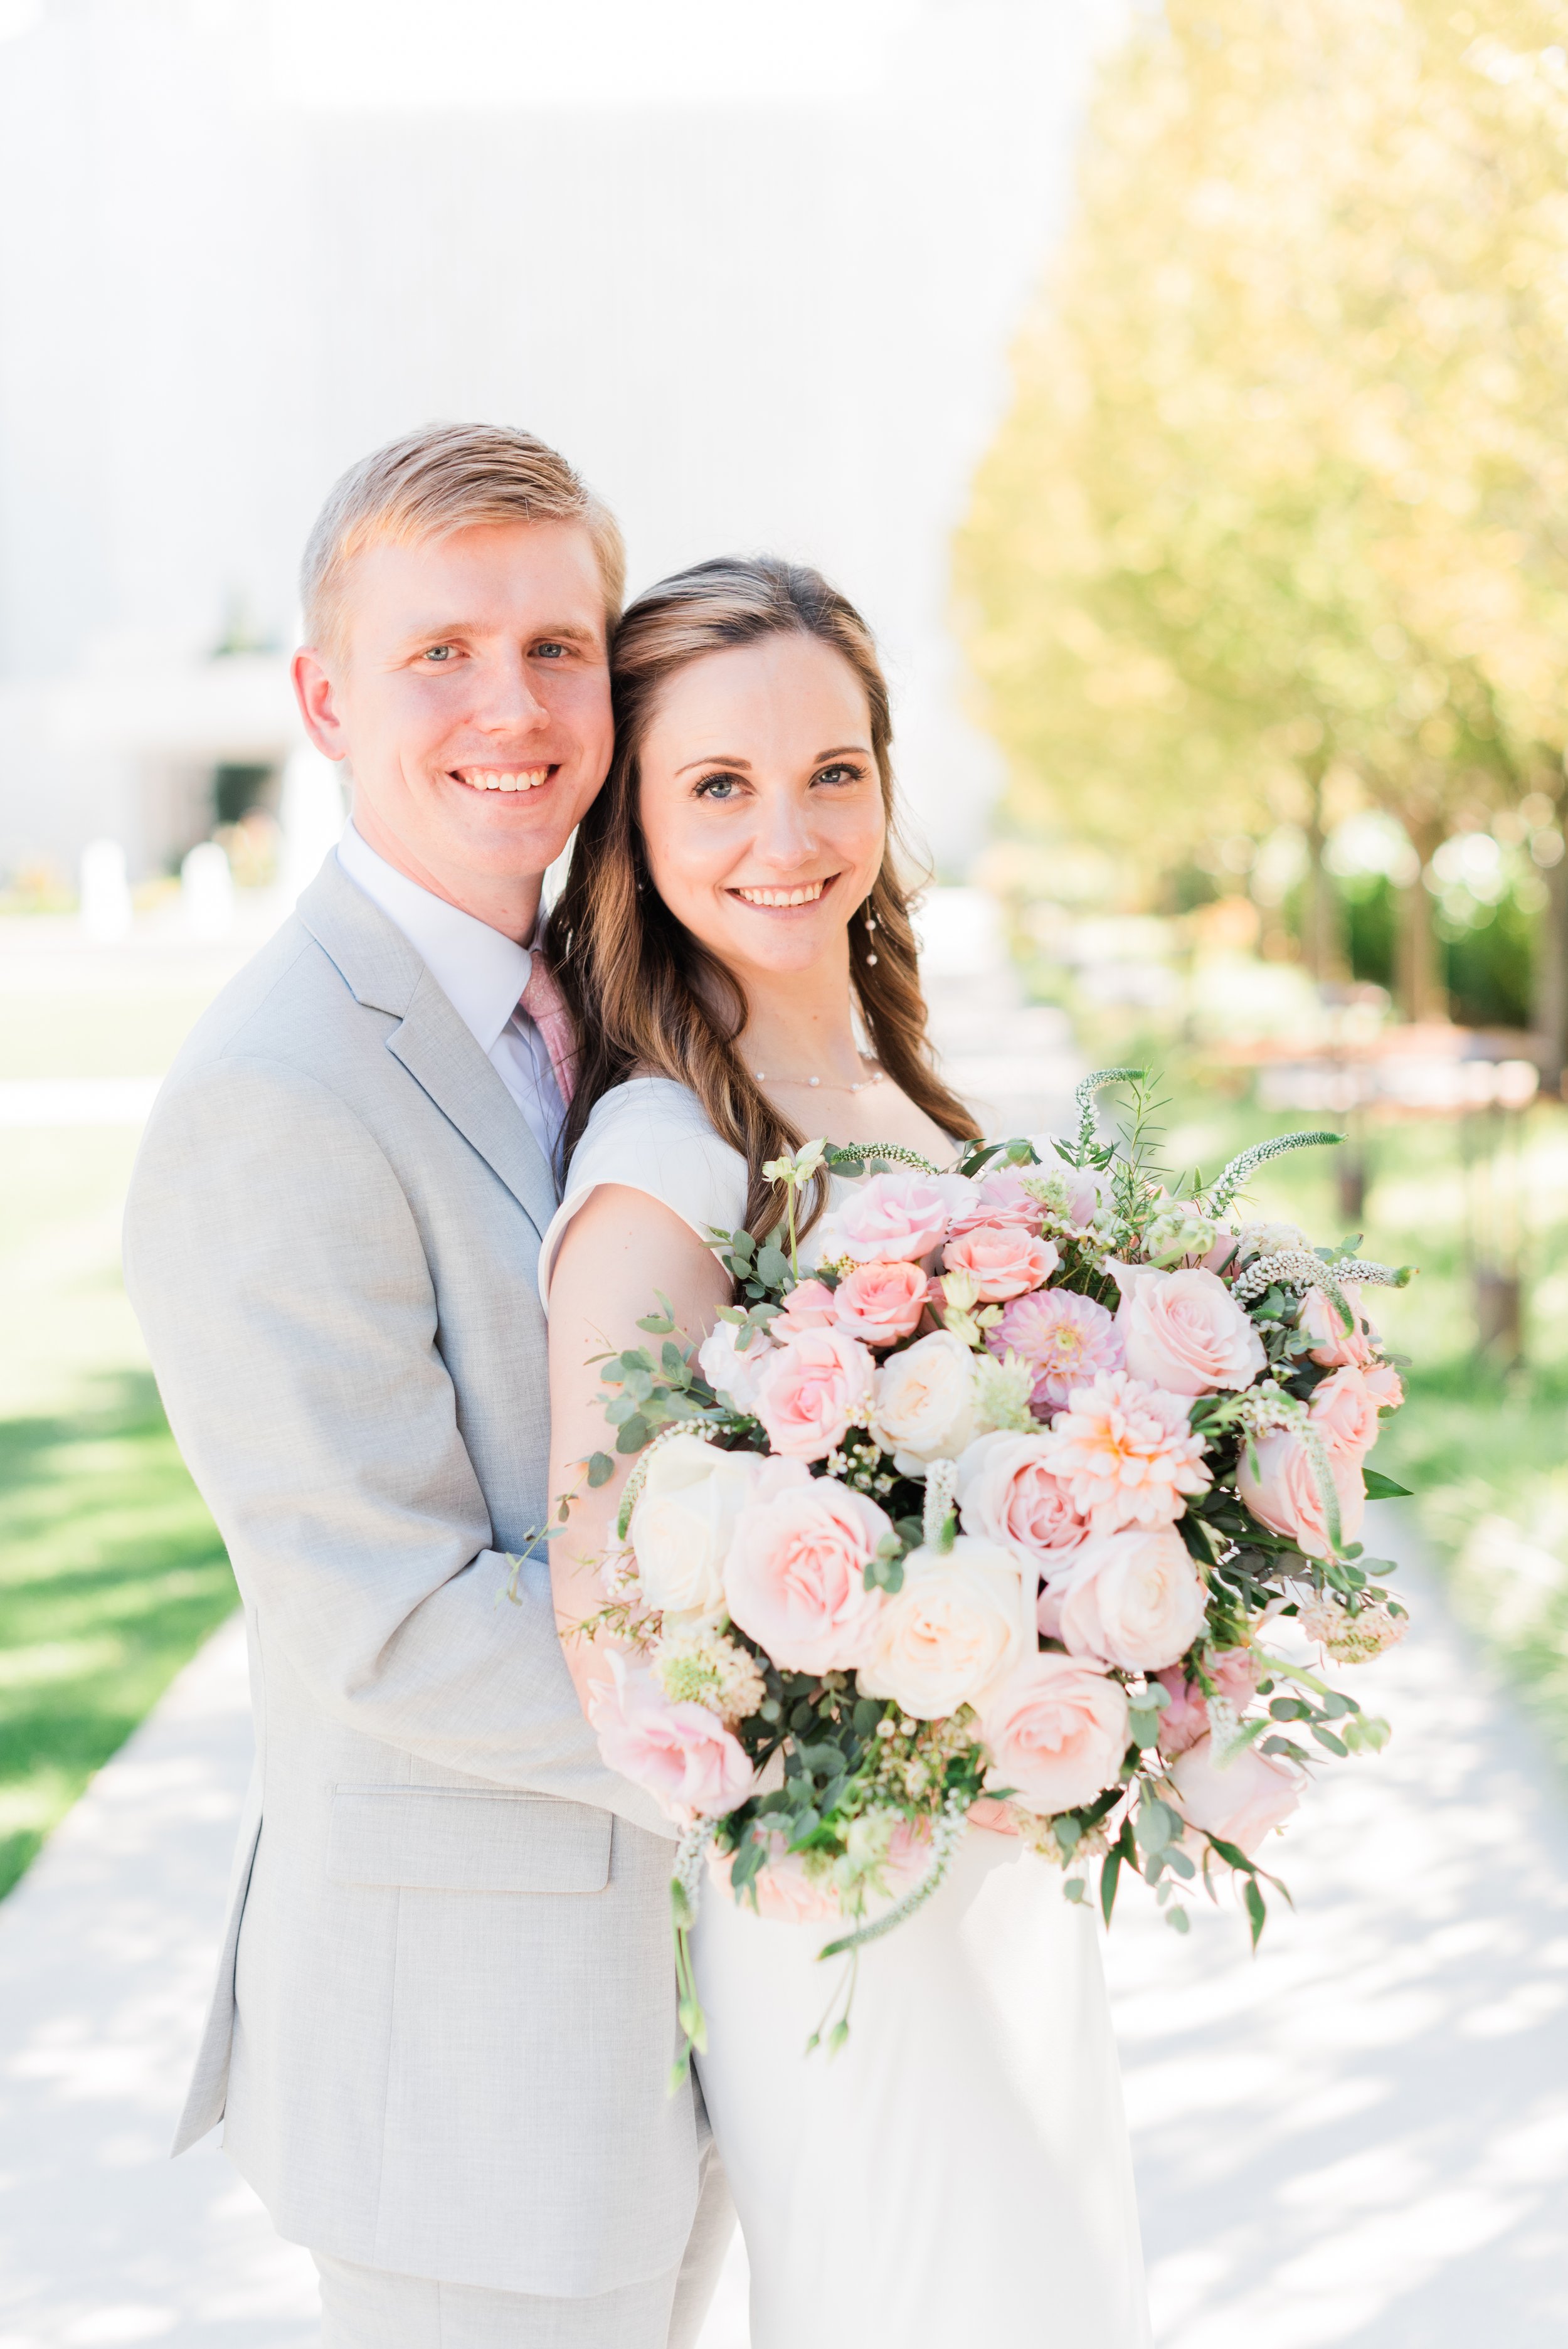  &nbsp;This newlywed bride poses with her stunning bouquet of blush and white roses in just married photos with her new husband at the Atlanta temple grounds. #marylandweddingphotographer #atlantaweddingphotographer #brideandgroom #justmarriedphotos 